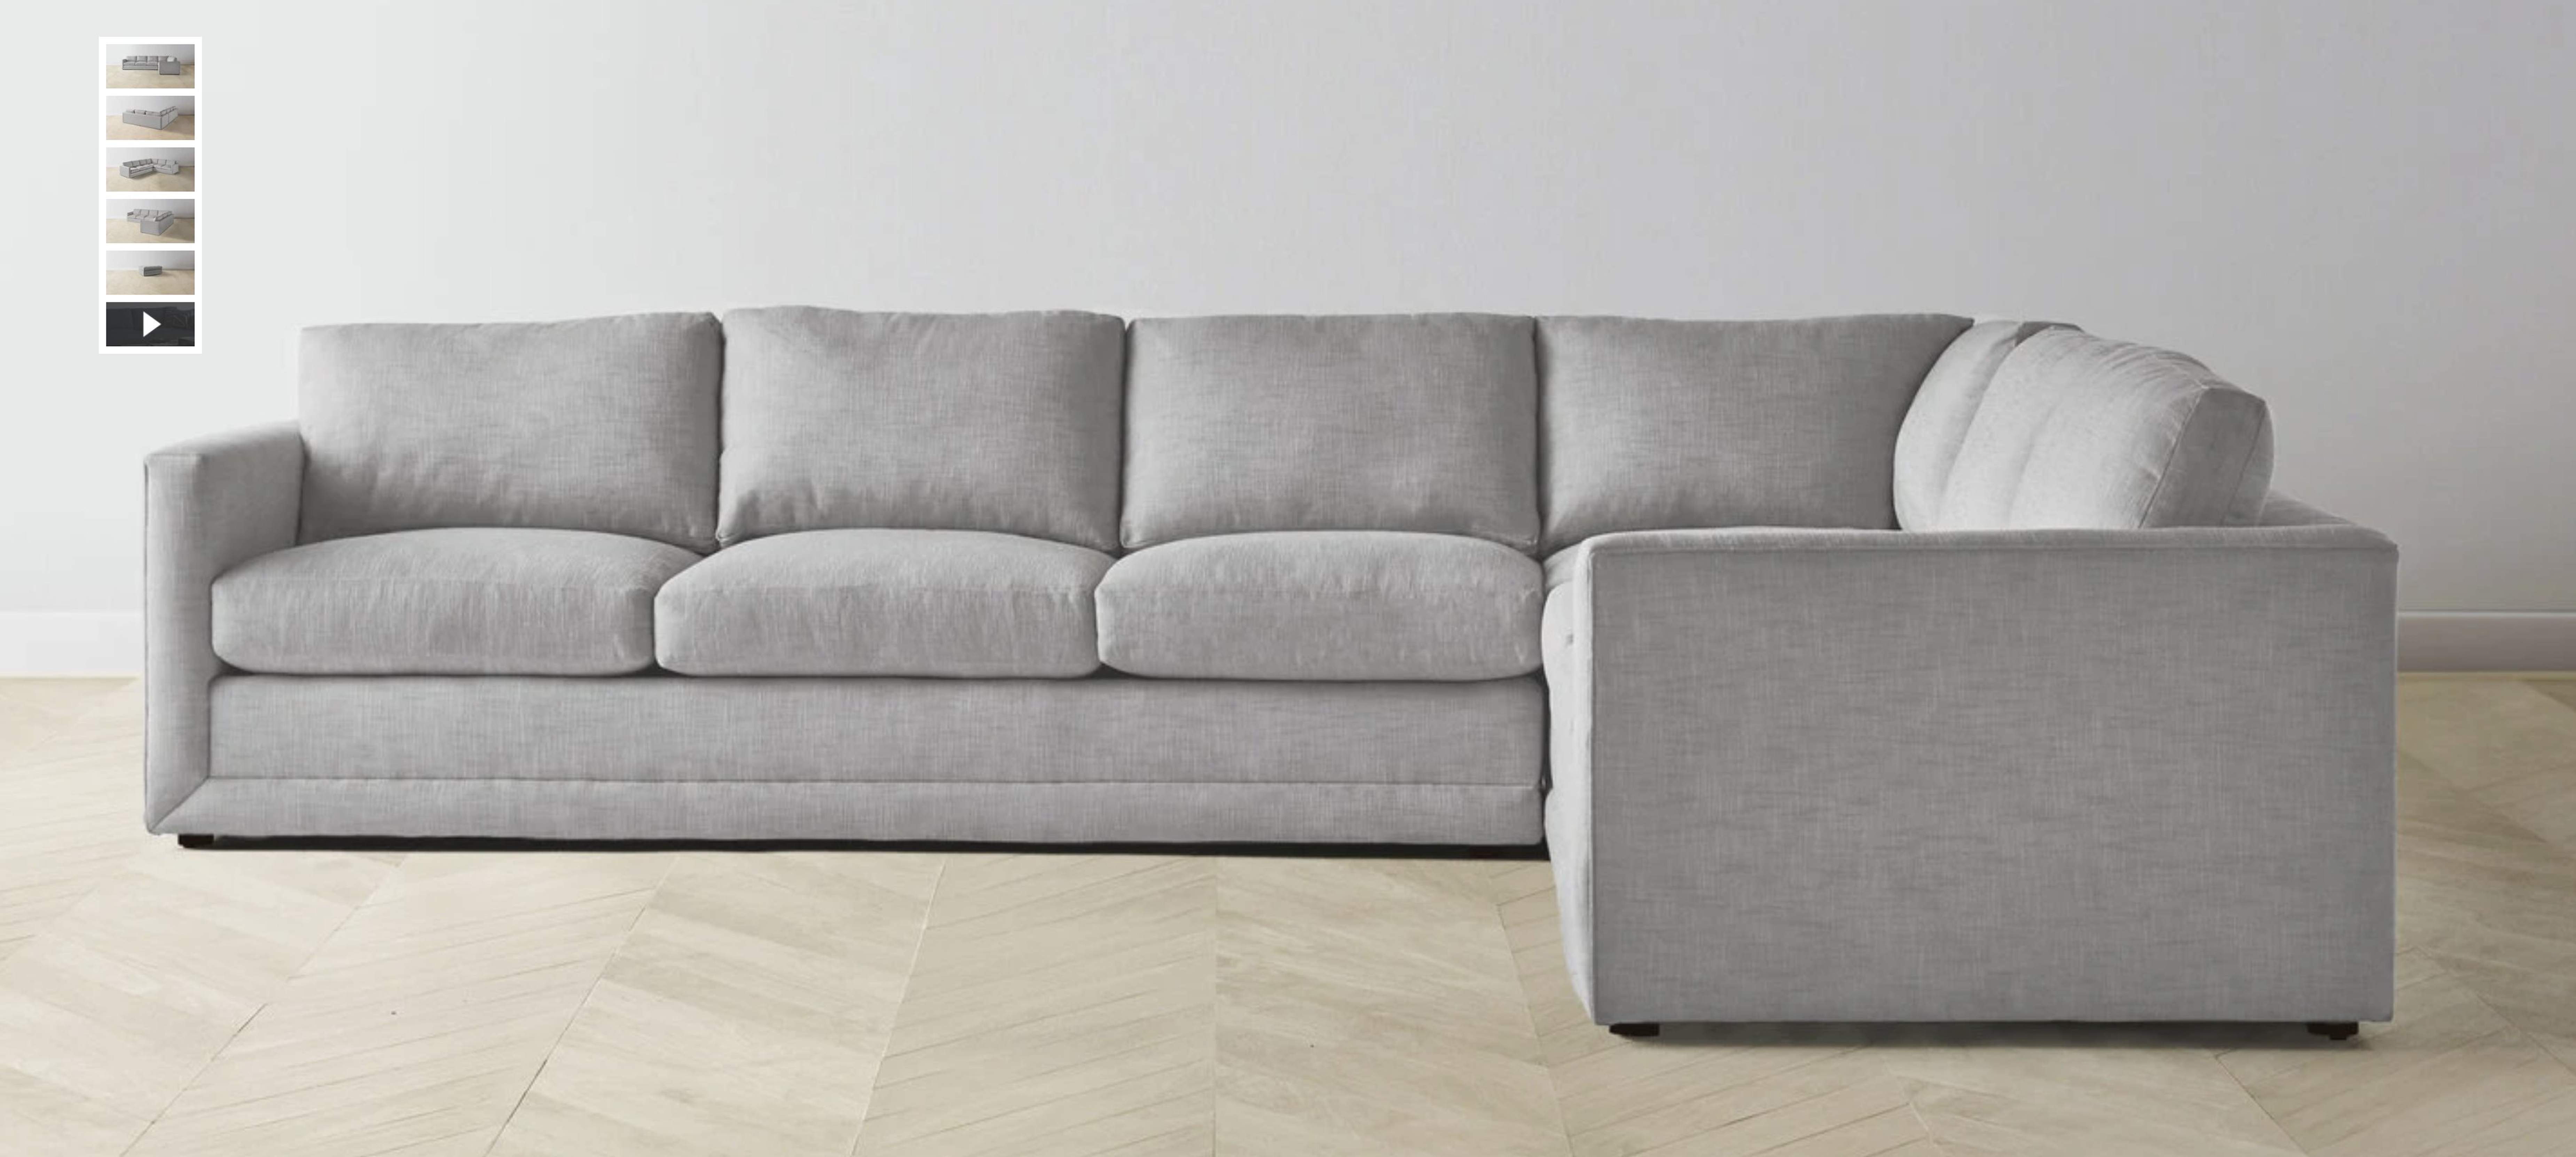 The Warren - Sectional - L Sectional - Right: 123" / Left: 98" - Maiden Home